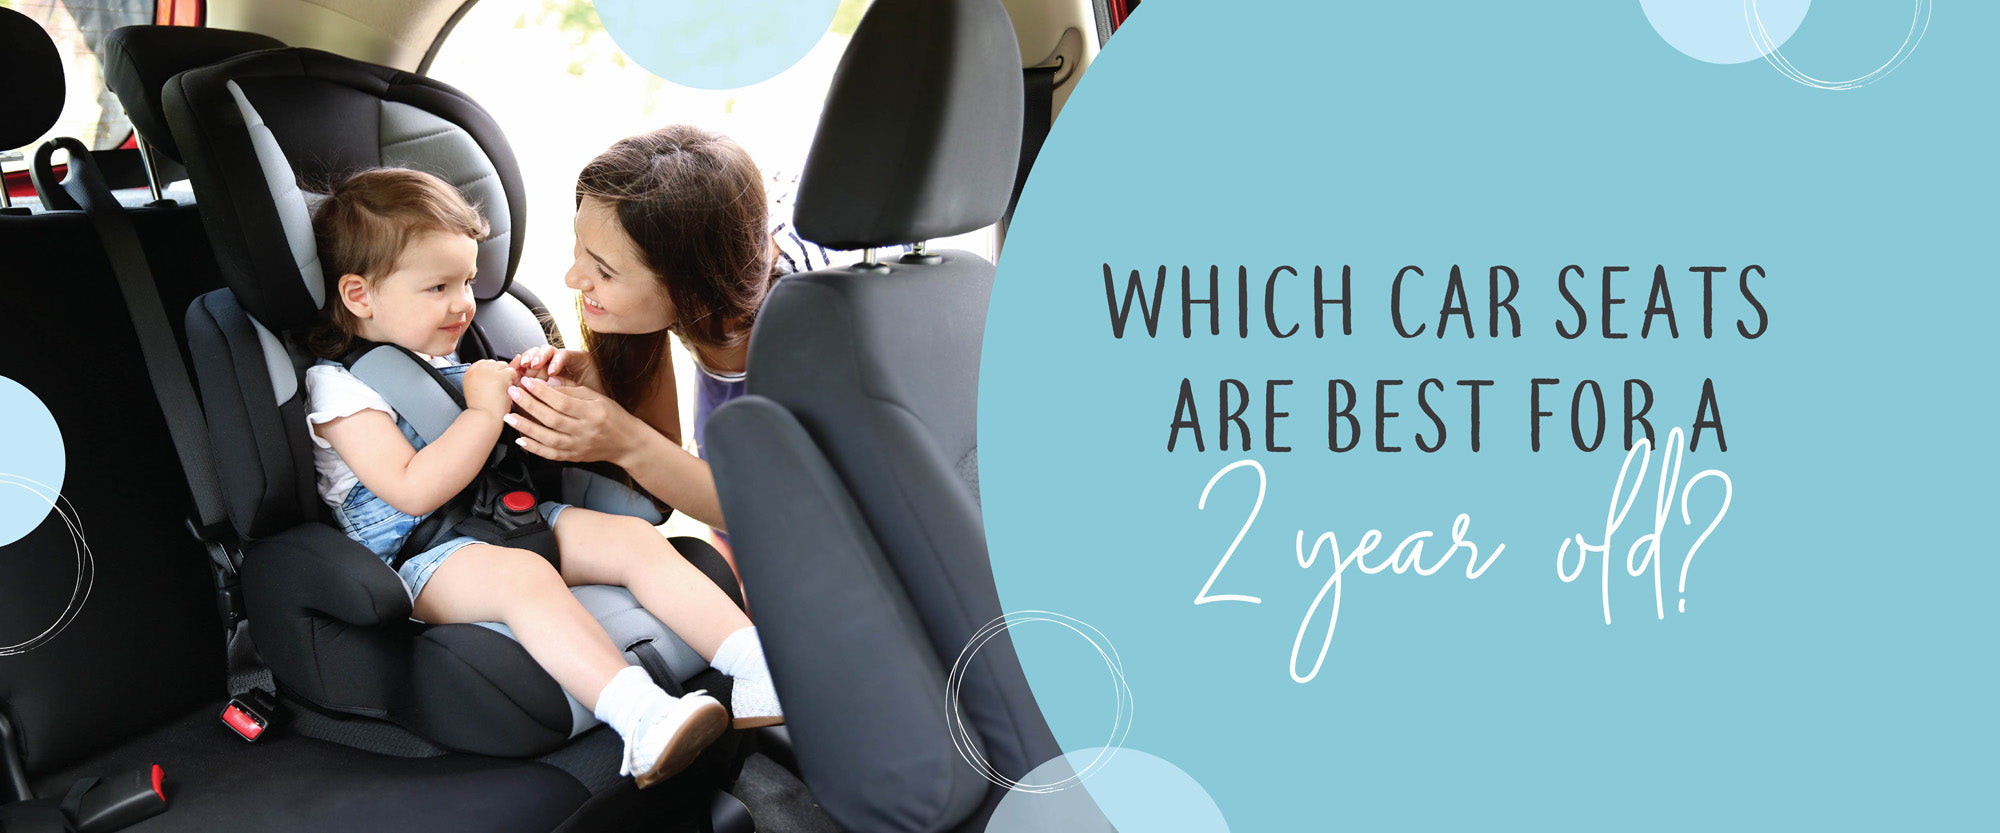 Which car seats are good for a 2 year old?